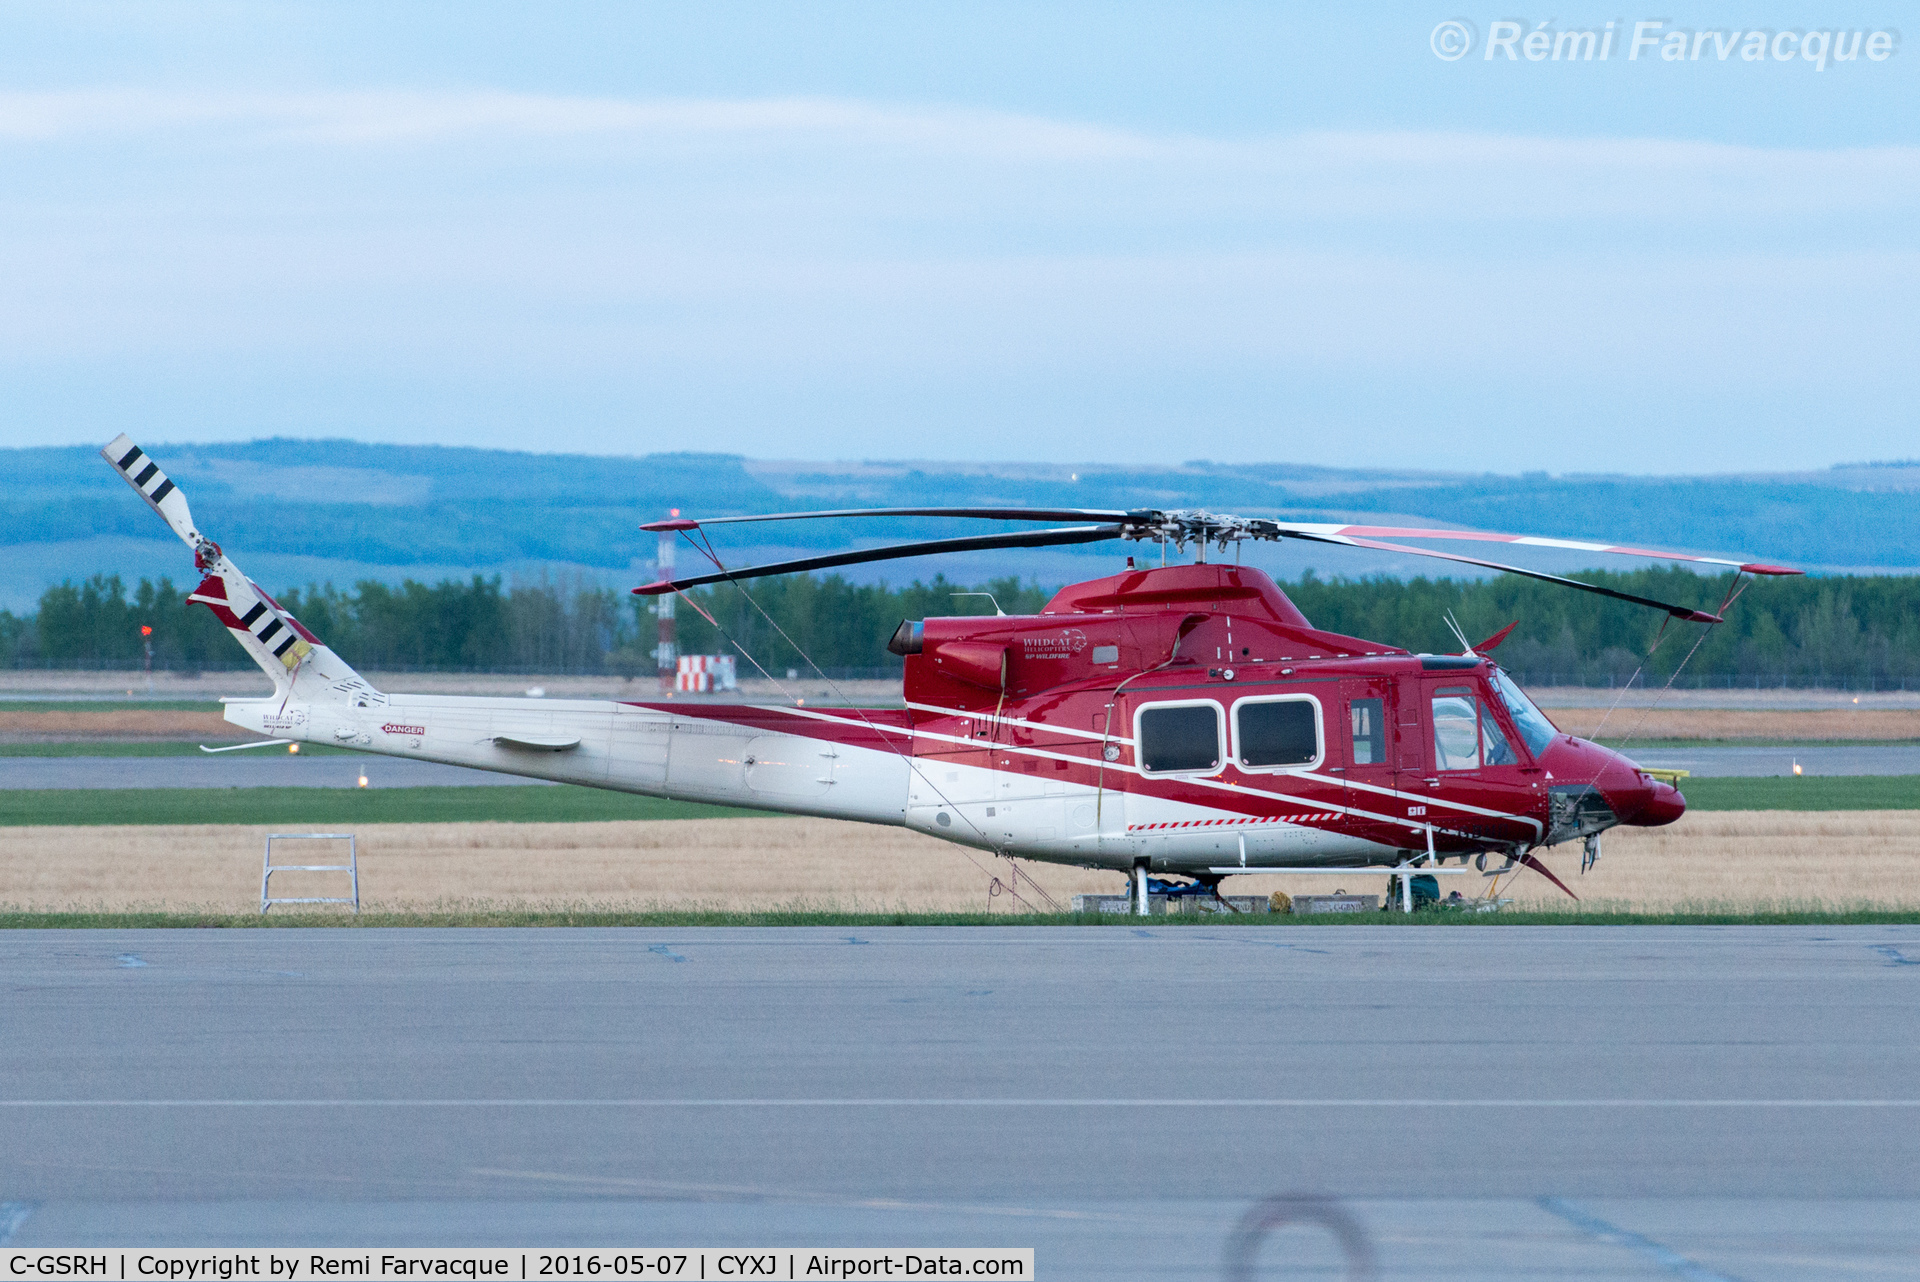 C-GSRH, Bell 212 C/N 30895, Parked on apron in front of main terminal building.